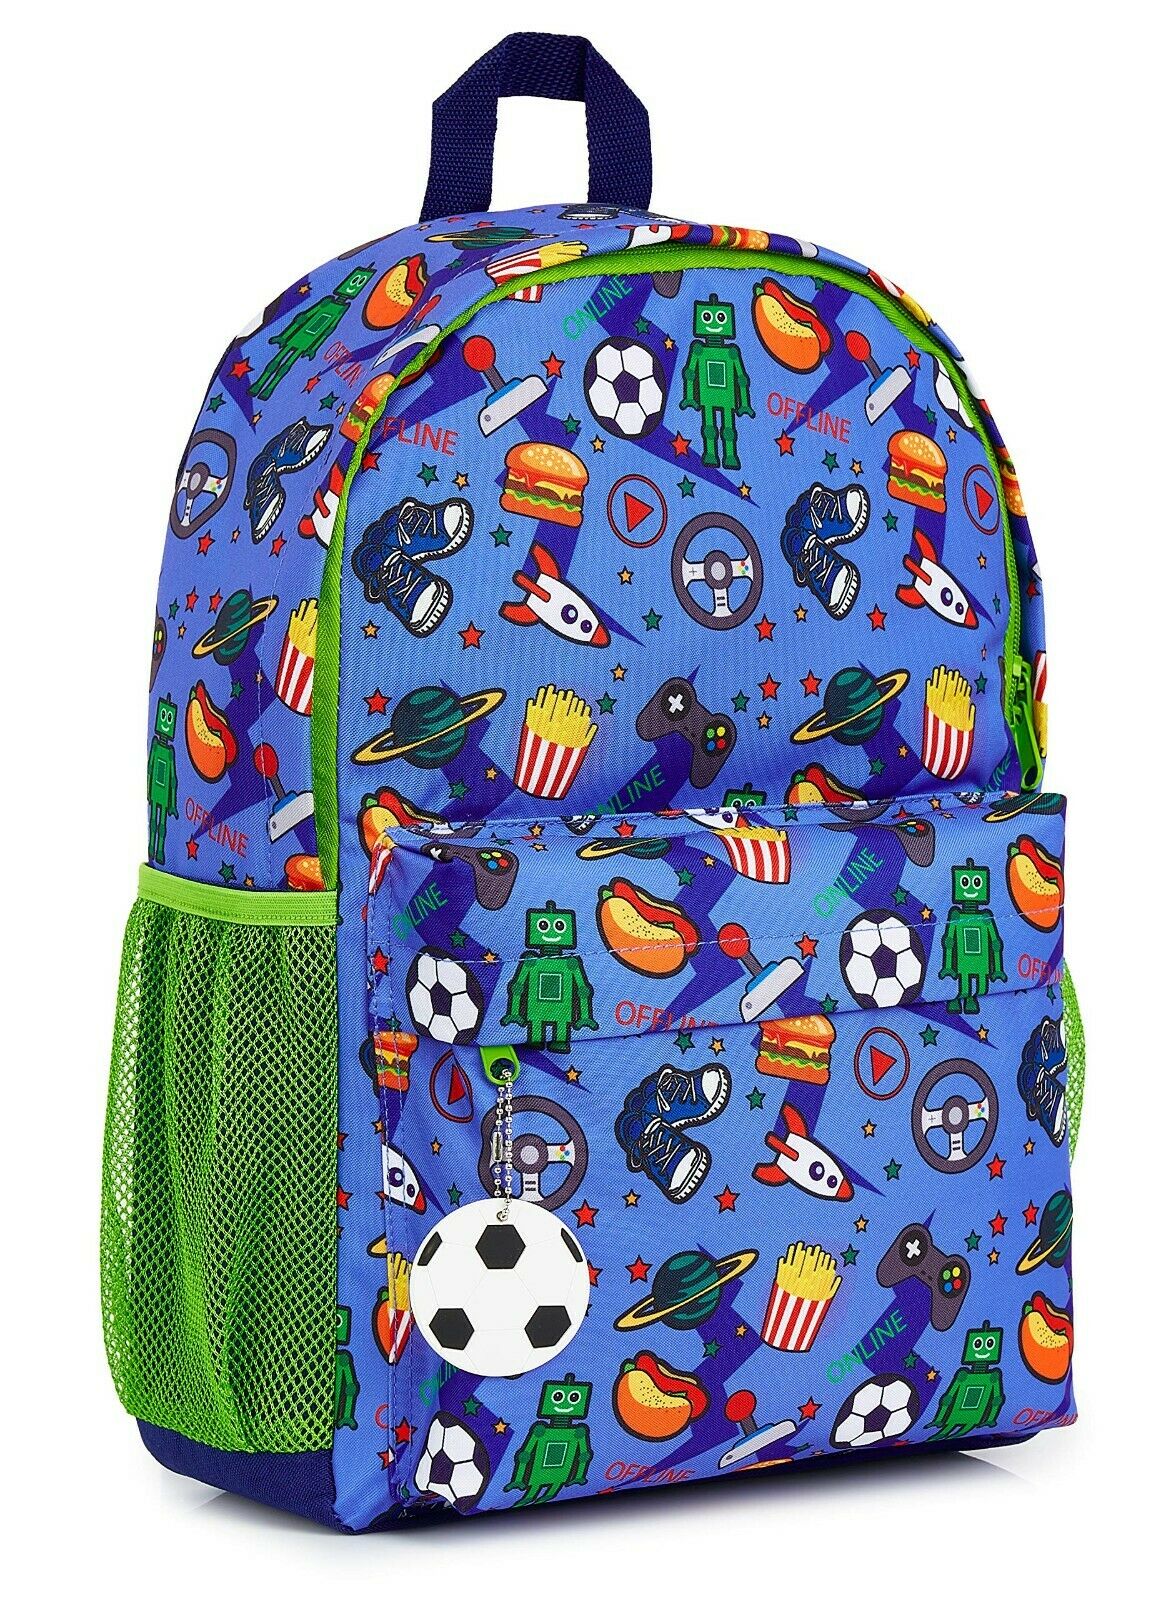 CityComfort Video Game Large Boys Backpack, Gamer Gifts for Boys Teens